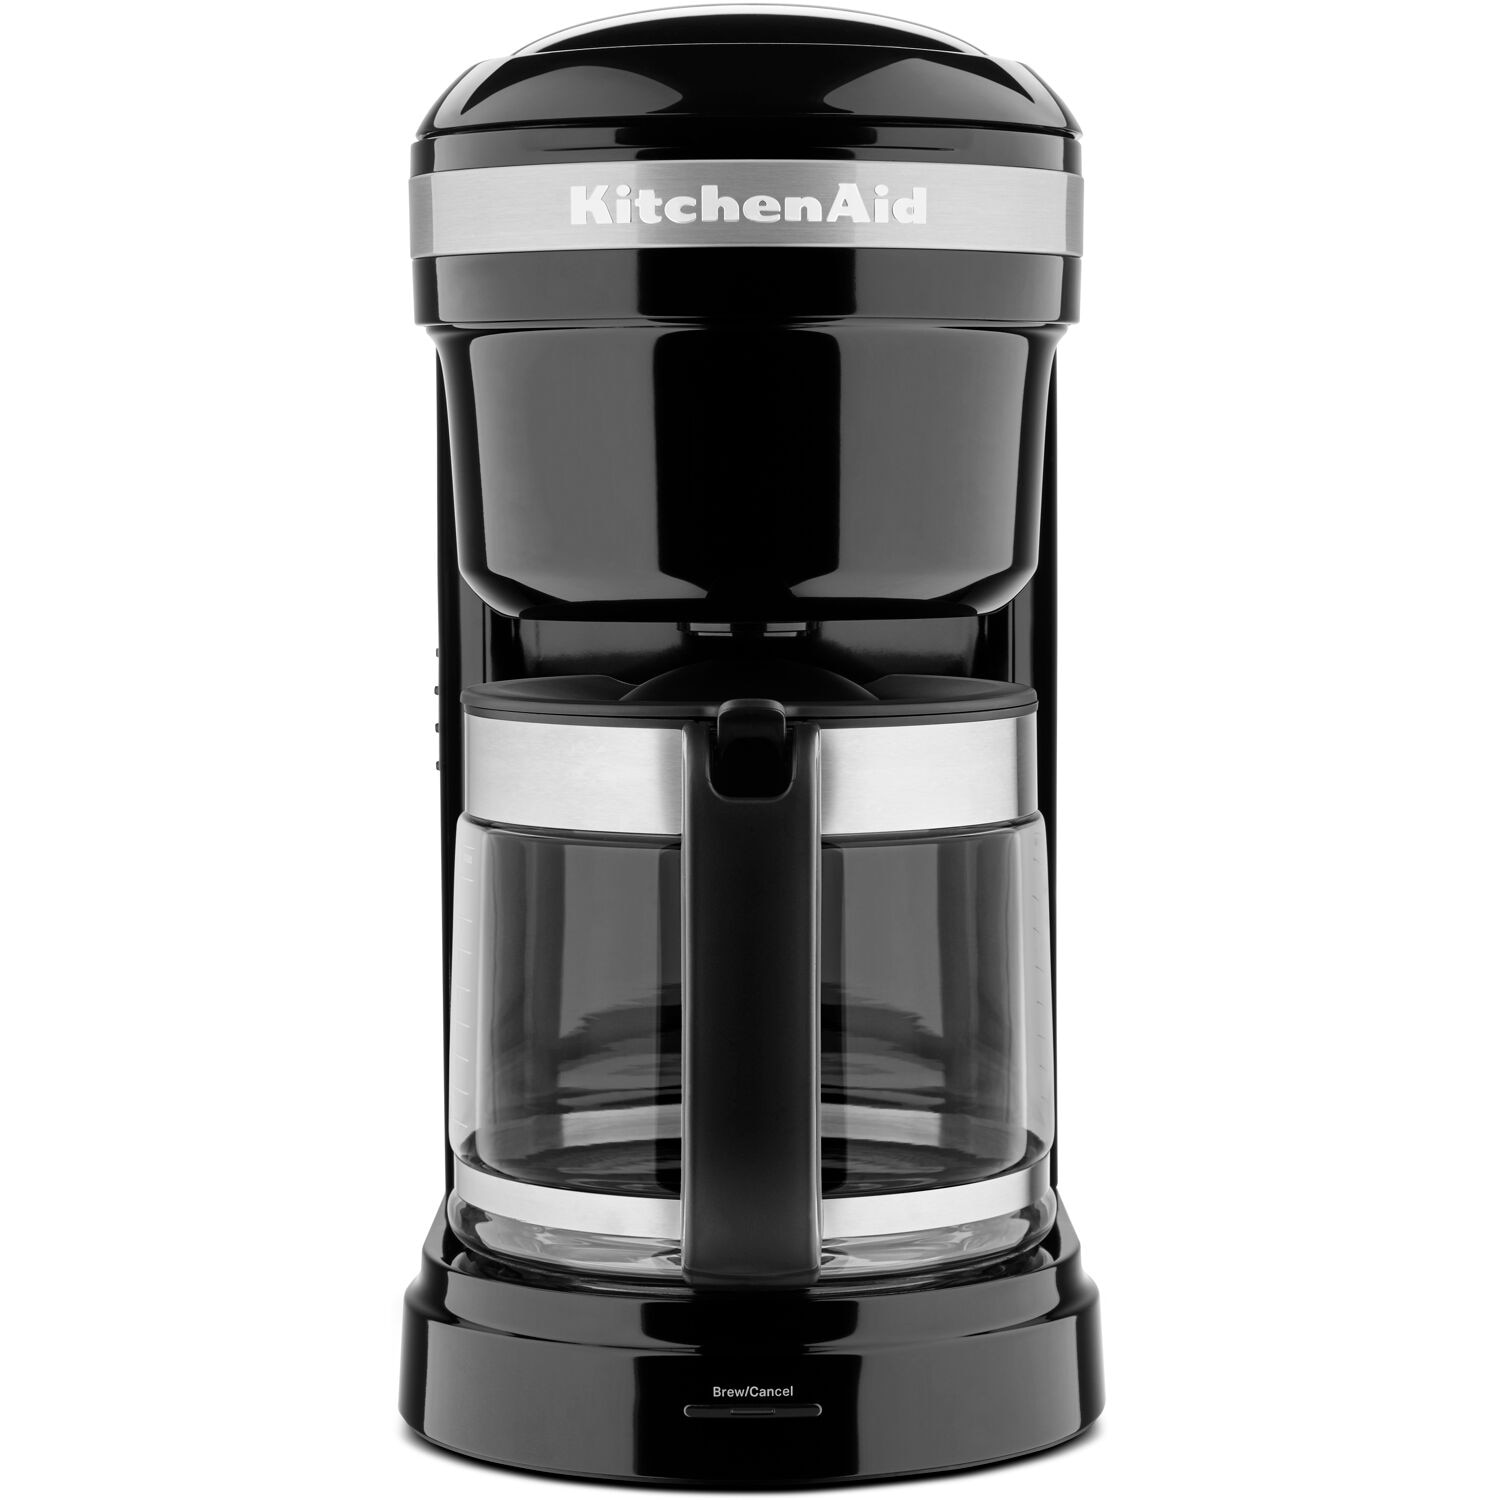 https://ak1.ostkcdn.com/images/products/is/images/direct/b9ea98c1b77ad72d17dc3be8574fb9f0f2033eb5/KitchenAid-12-Cup-Drip-Coffee-Maker-with-Spiral-Showerhead-in-Onyx-Black.jpg